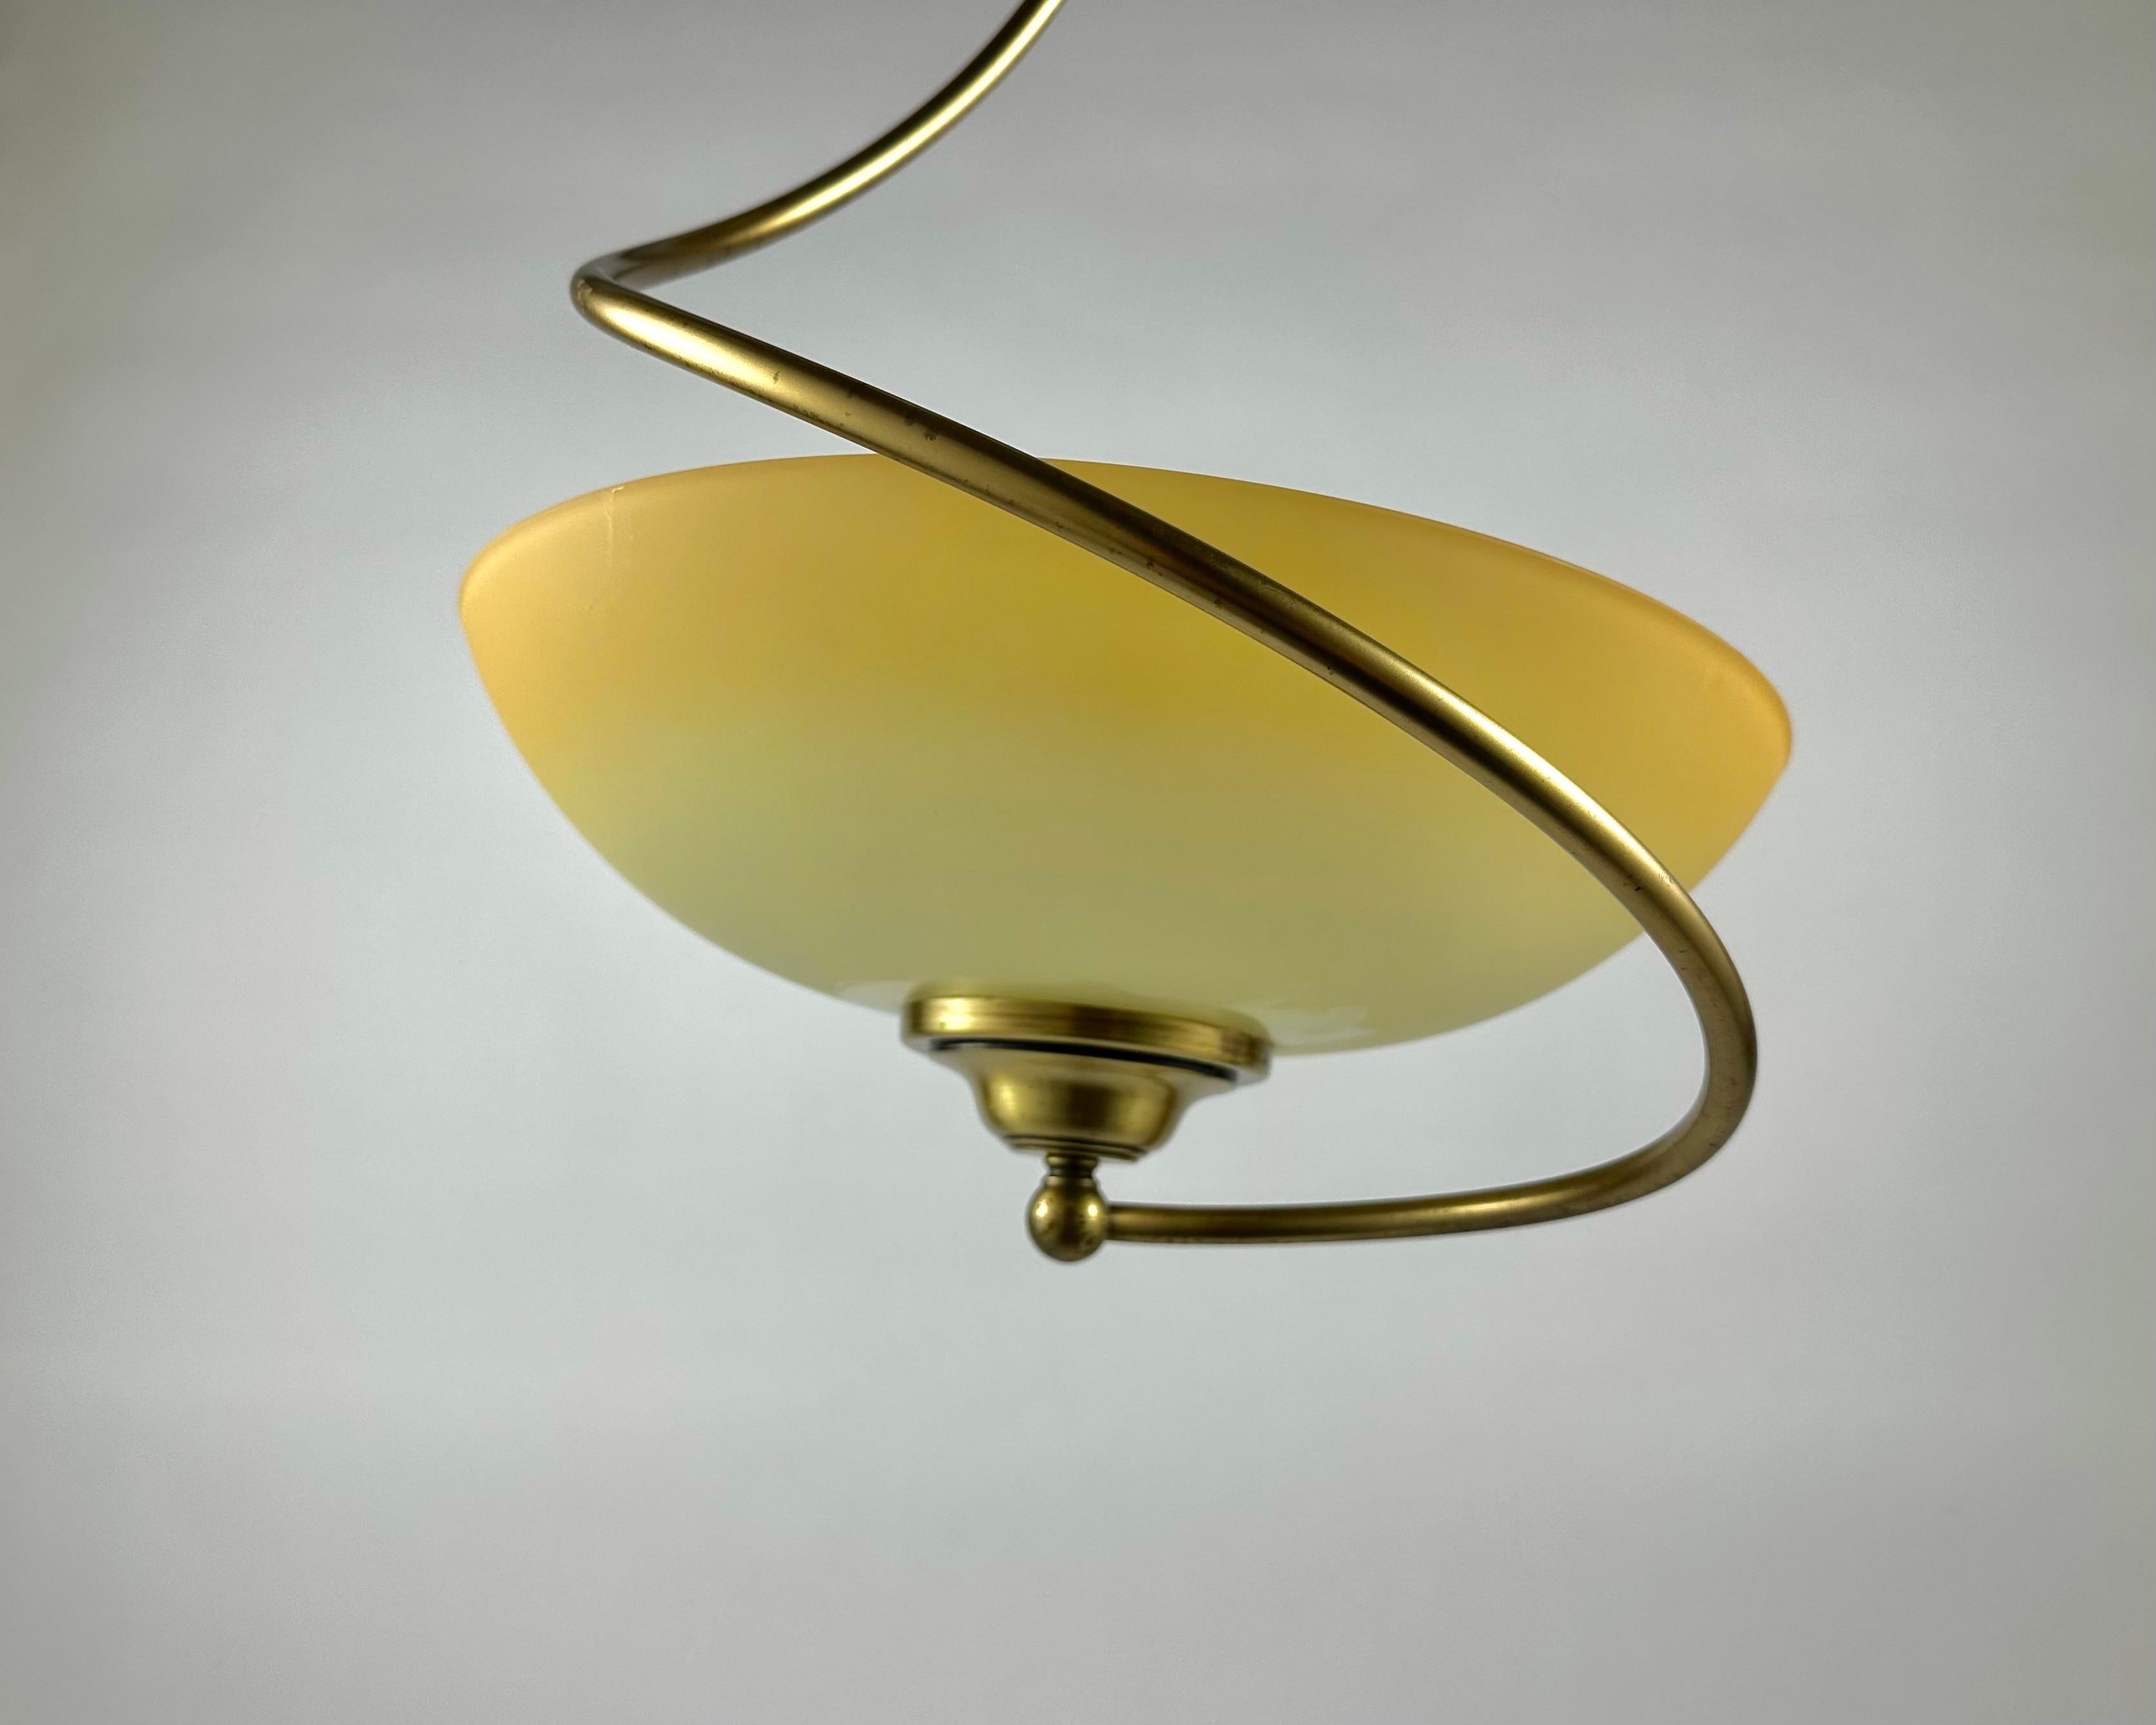 This Art Deco style hanging light was manufactured by CVL in France.

Chandelier or ceiling lamp made of brass. All CVL luminaires are the result of an absolute requirement: to make every model, every product an expression of know-how, combining